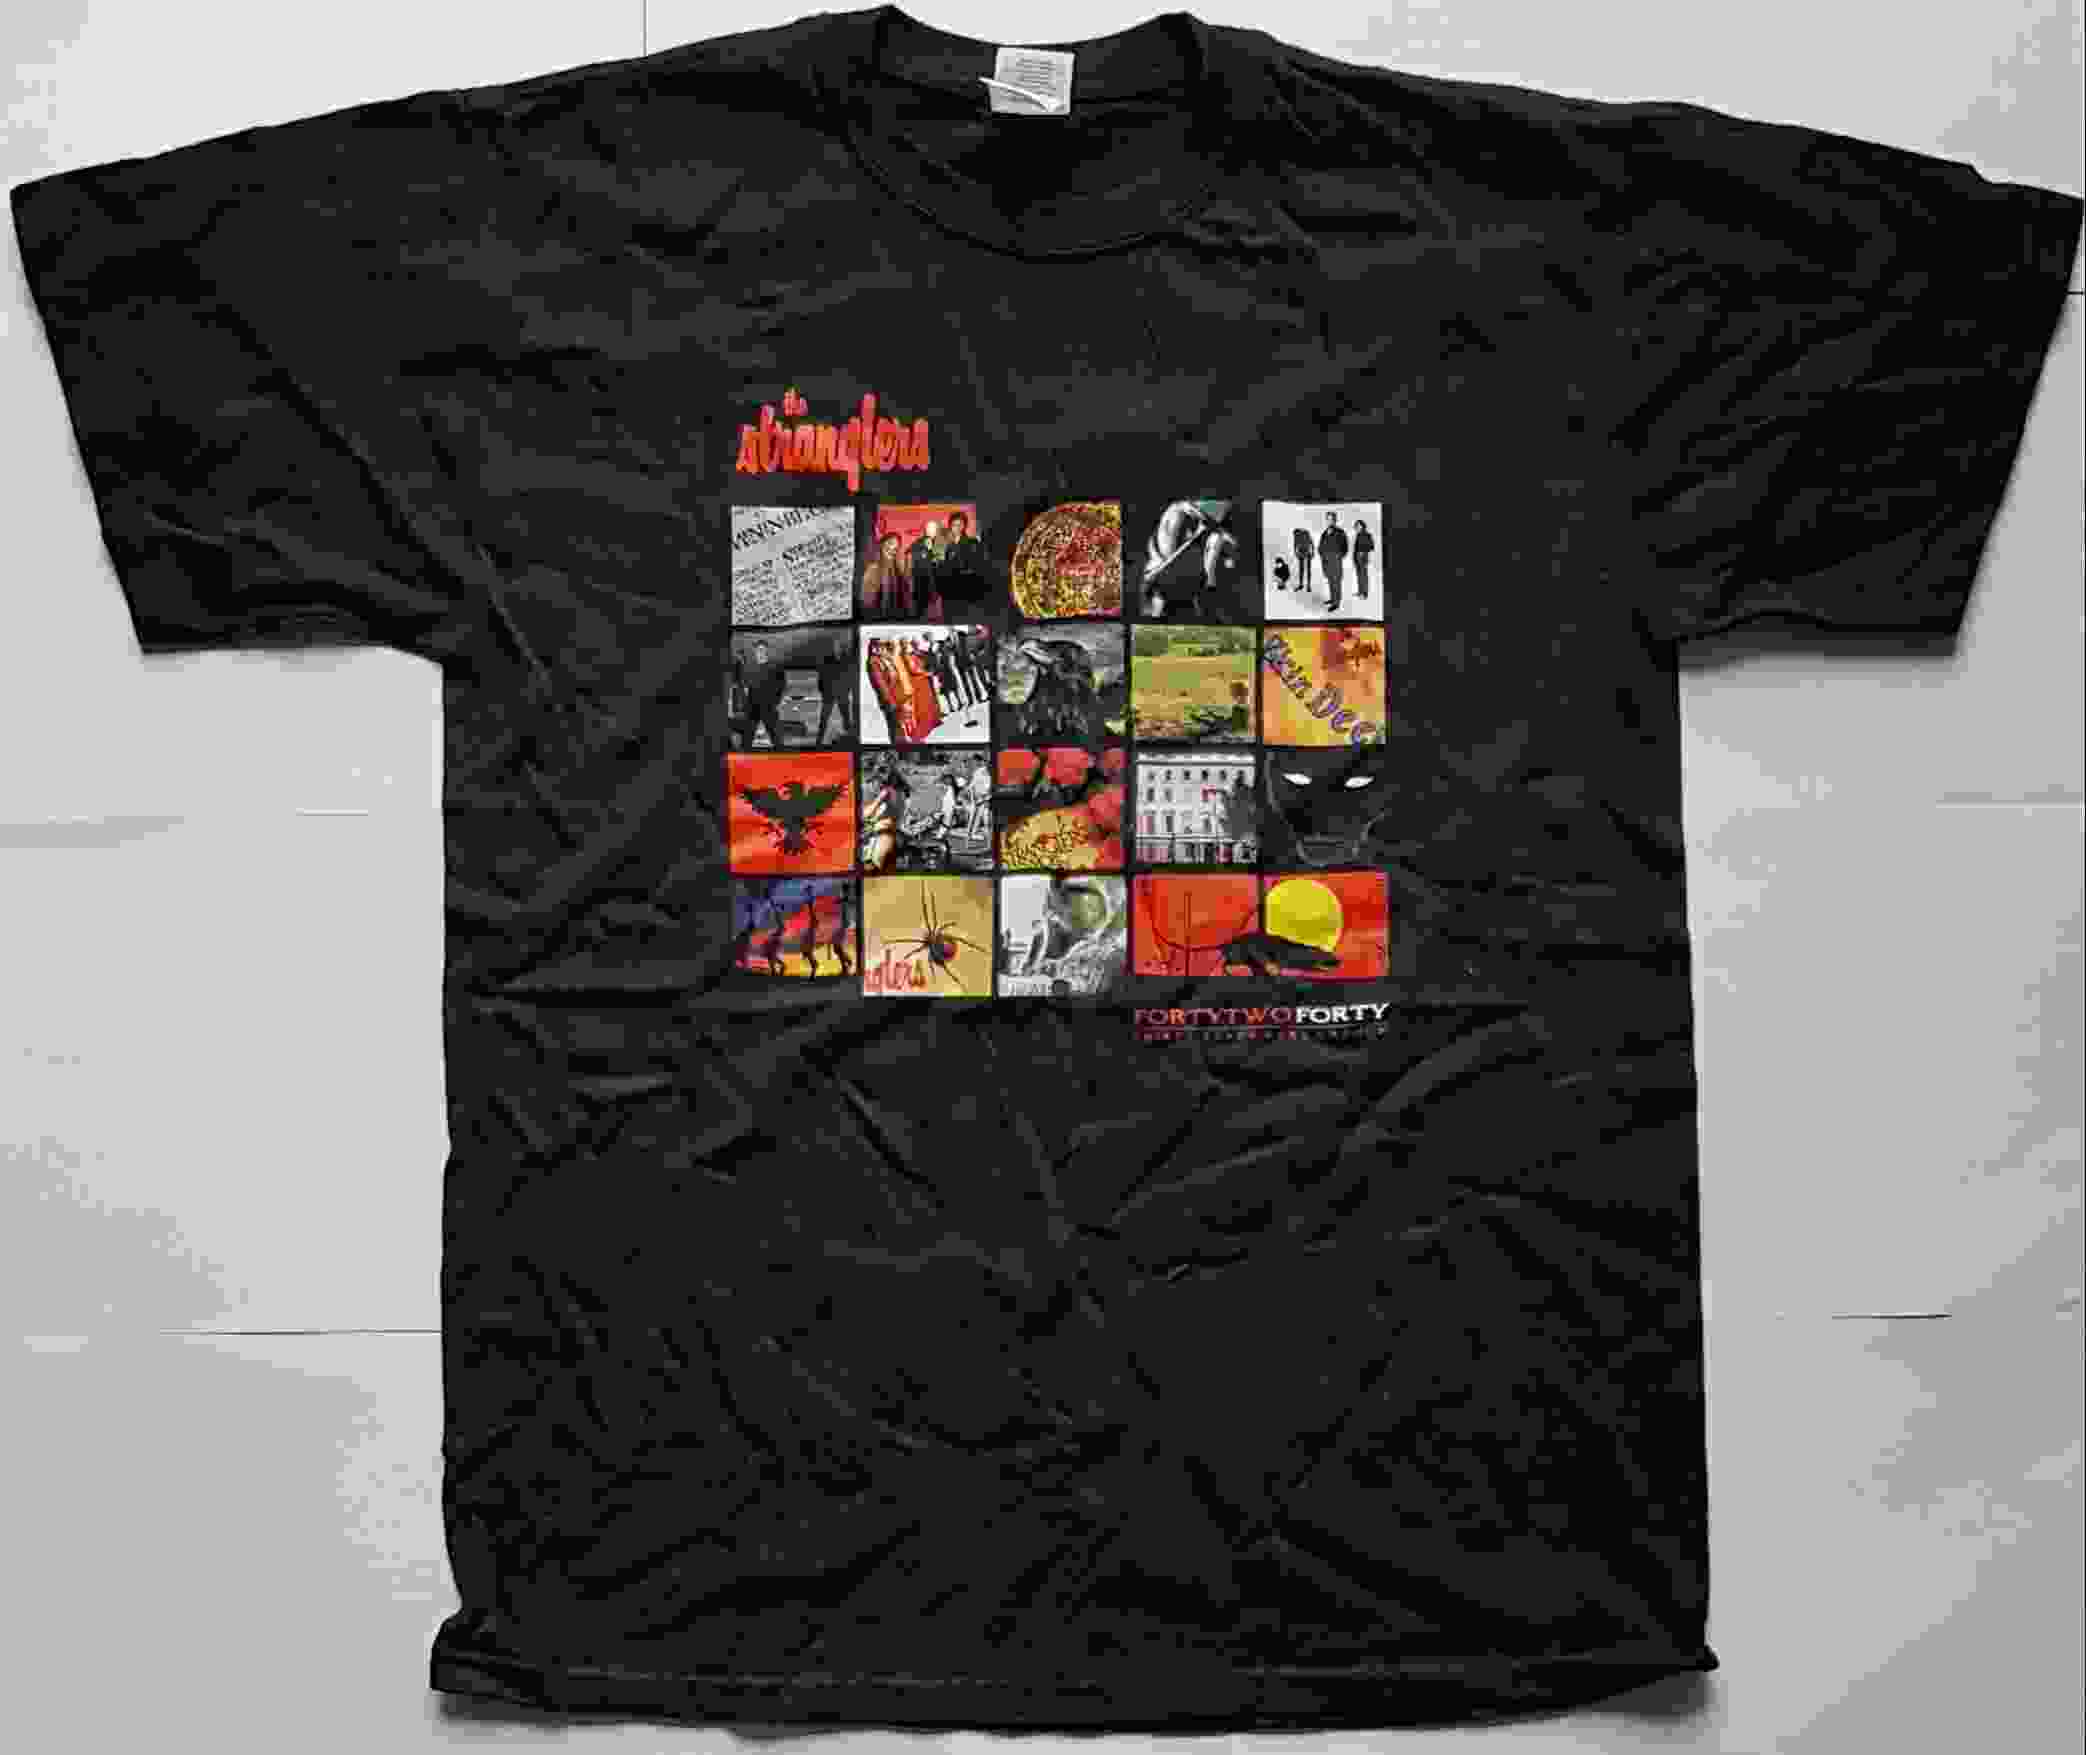 Picture of Greatest hits tour by artist The Stranglers from The Stranglers clothes